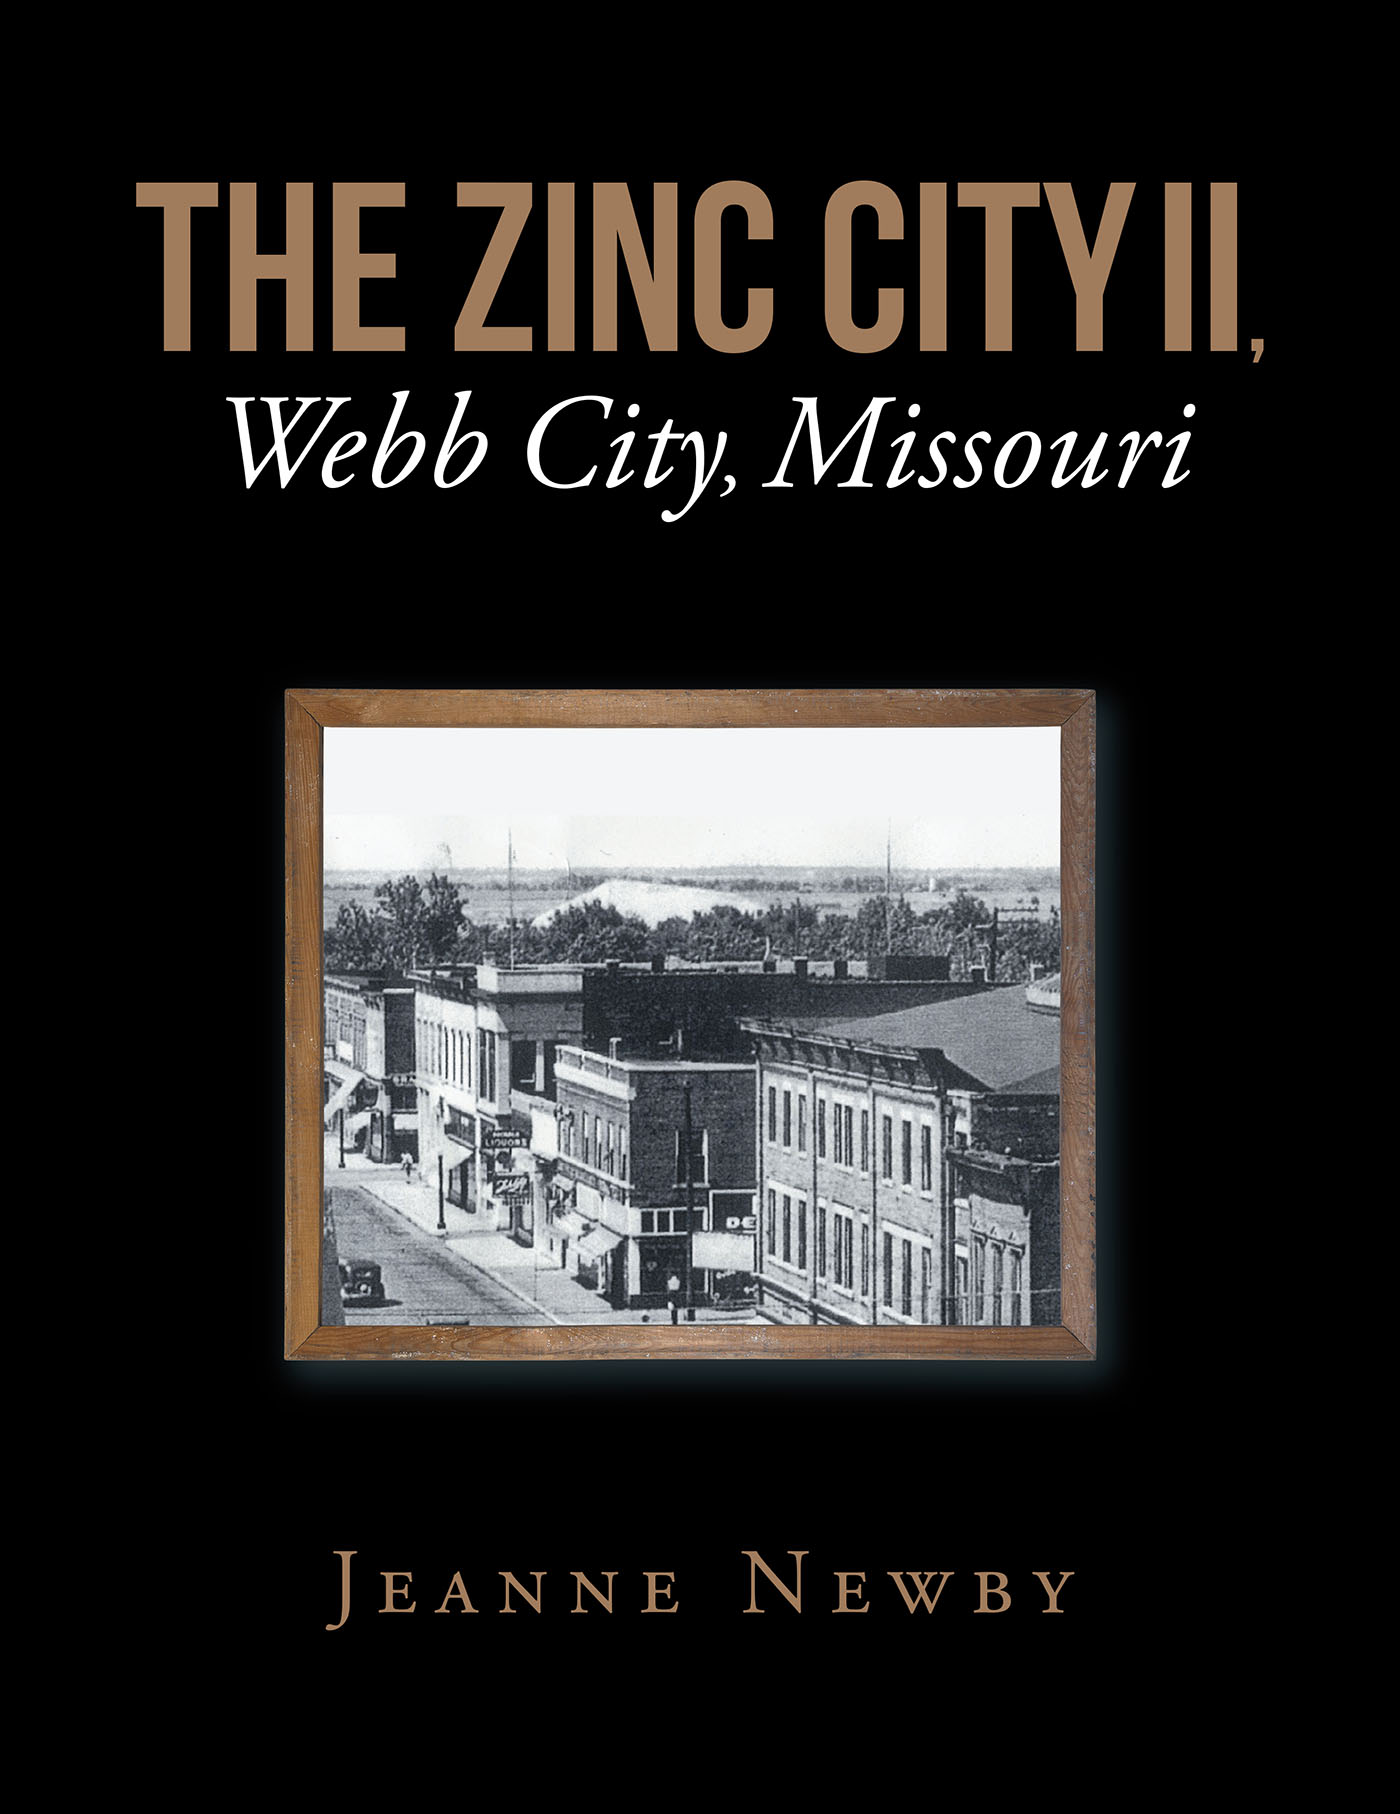 Author Jeanne Newby’s New Book, "THE ZINC CITY II, Webb City, Missouri," Explores the History of a Small Mining Town in Southwest Missouri Known as "The Zinc City"